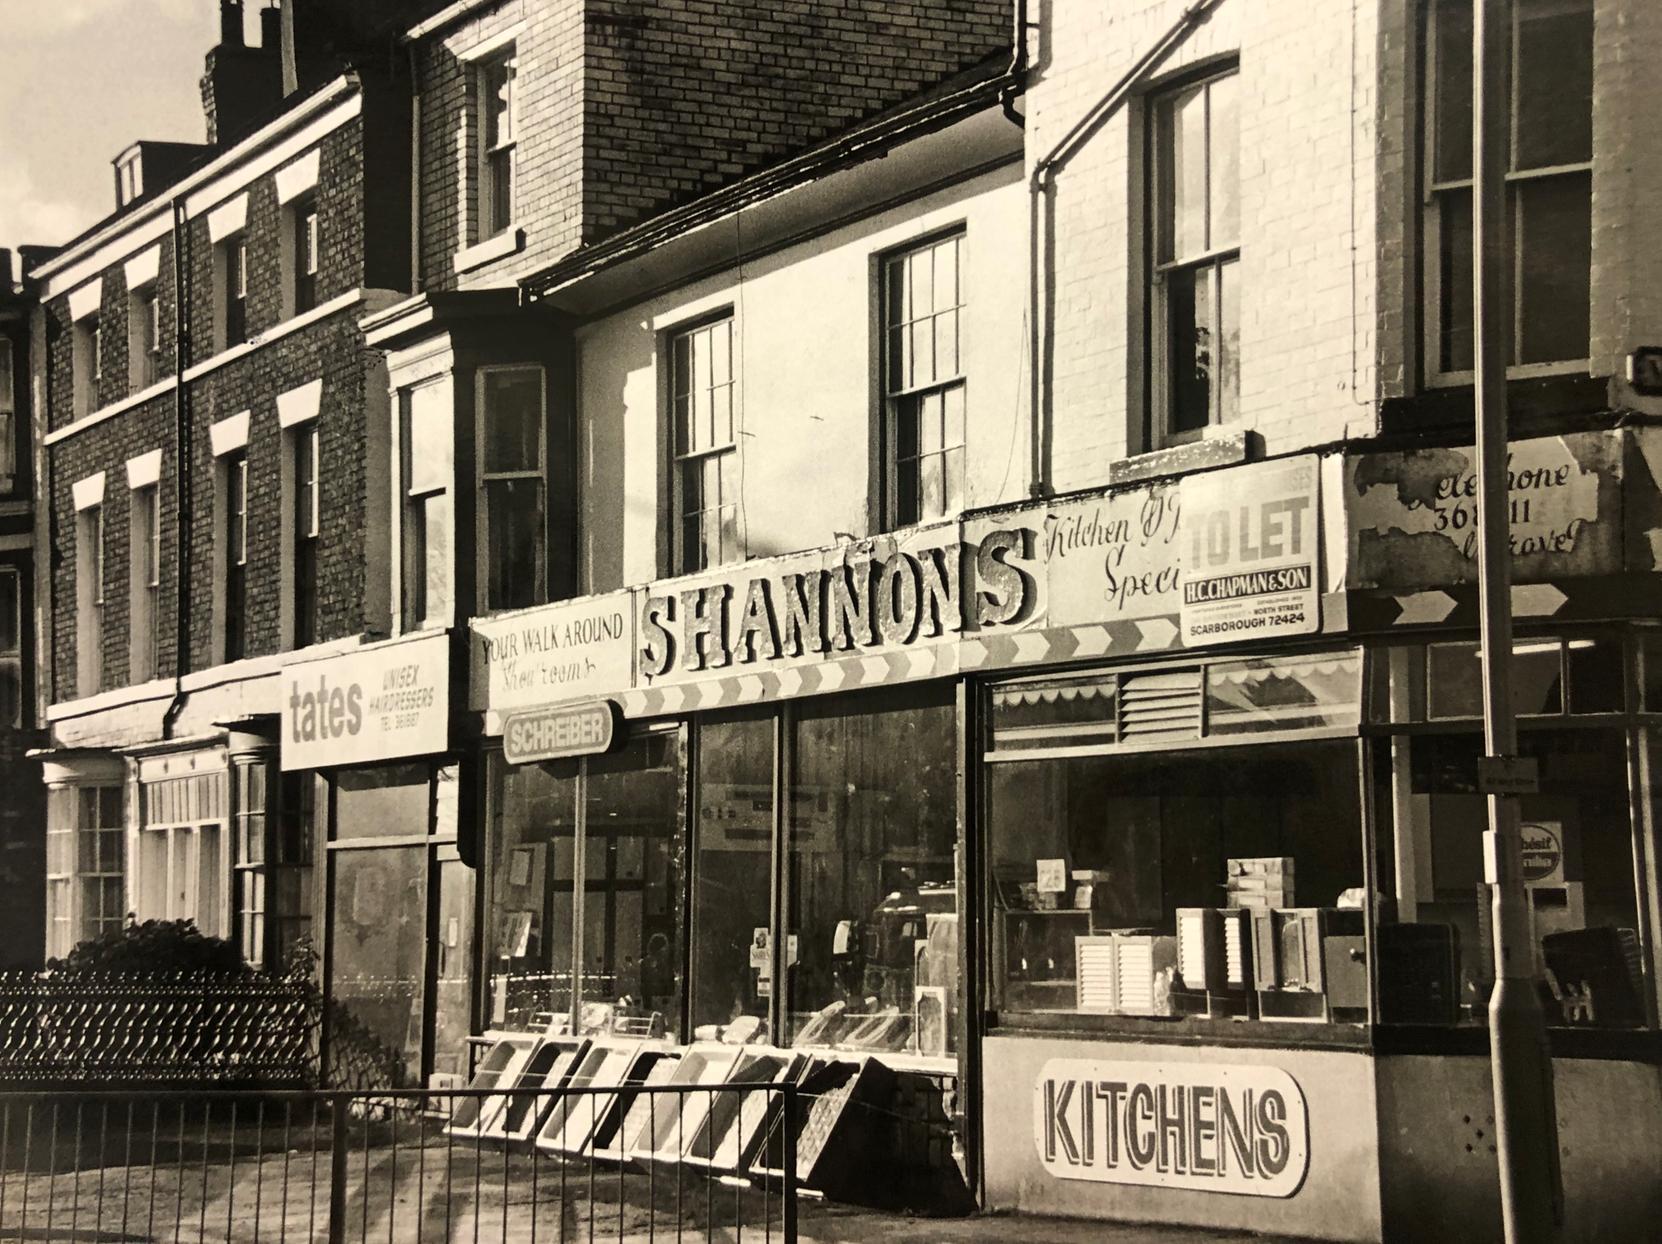 On the corner of Victoria Road, this kitchen shop is now a branch of William Hill bookmakers. Next door, is still a hairdresser, though now with a different name - Tete a Tete.